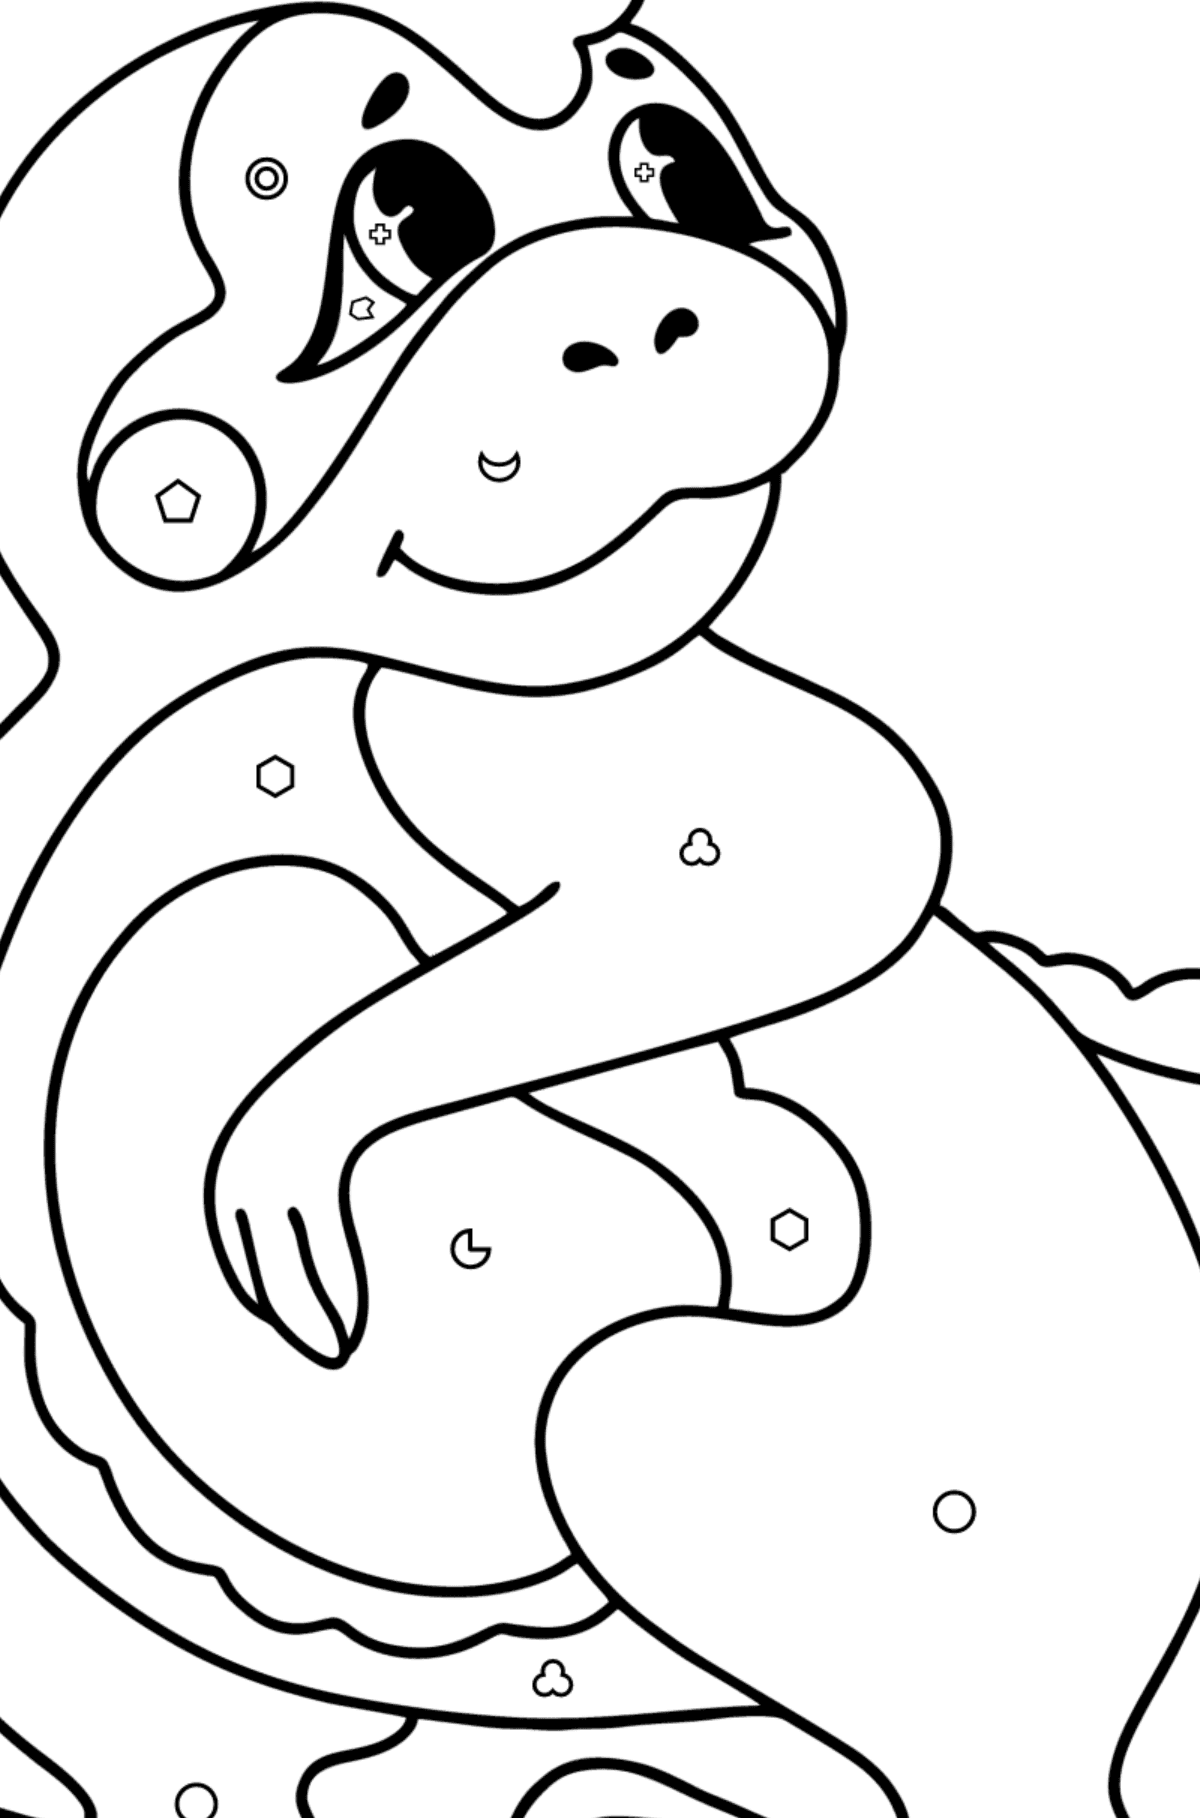 Baby dragon coloring page - Coloring by Geometric Shapes for Kids